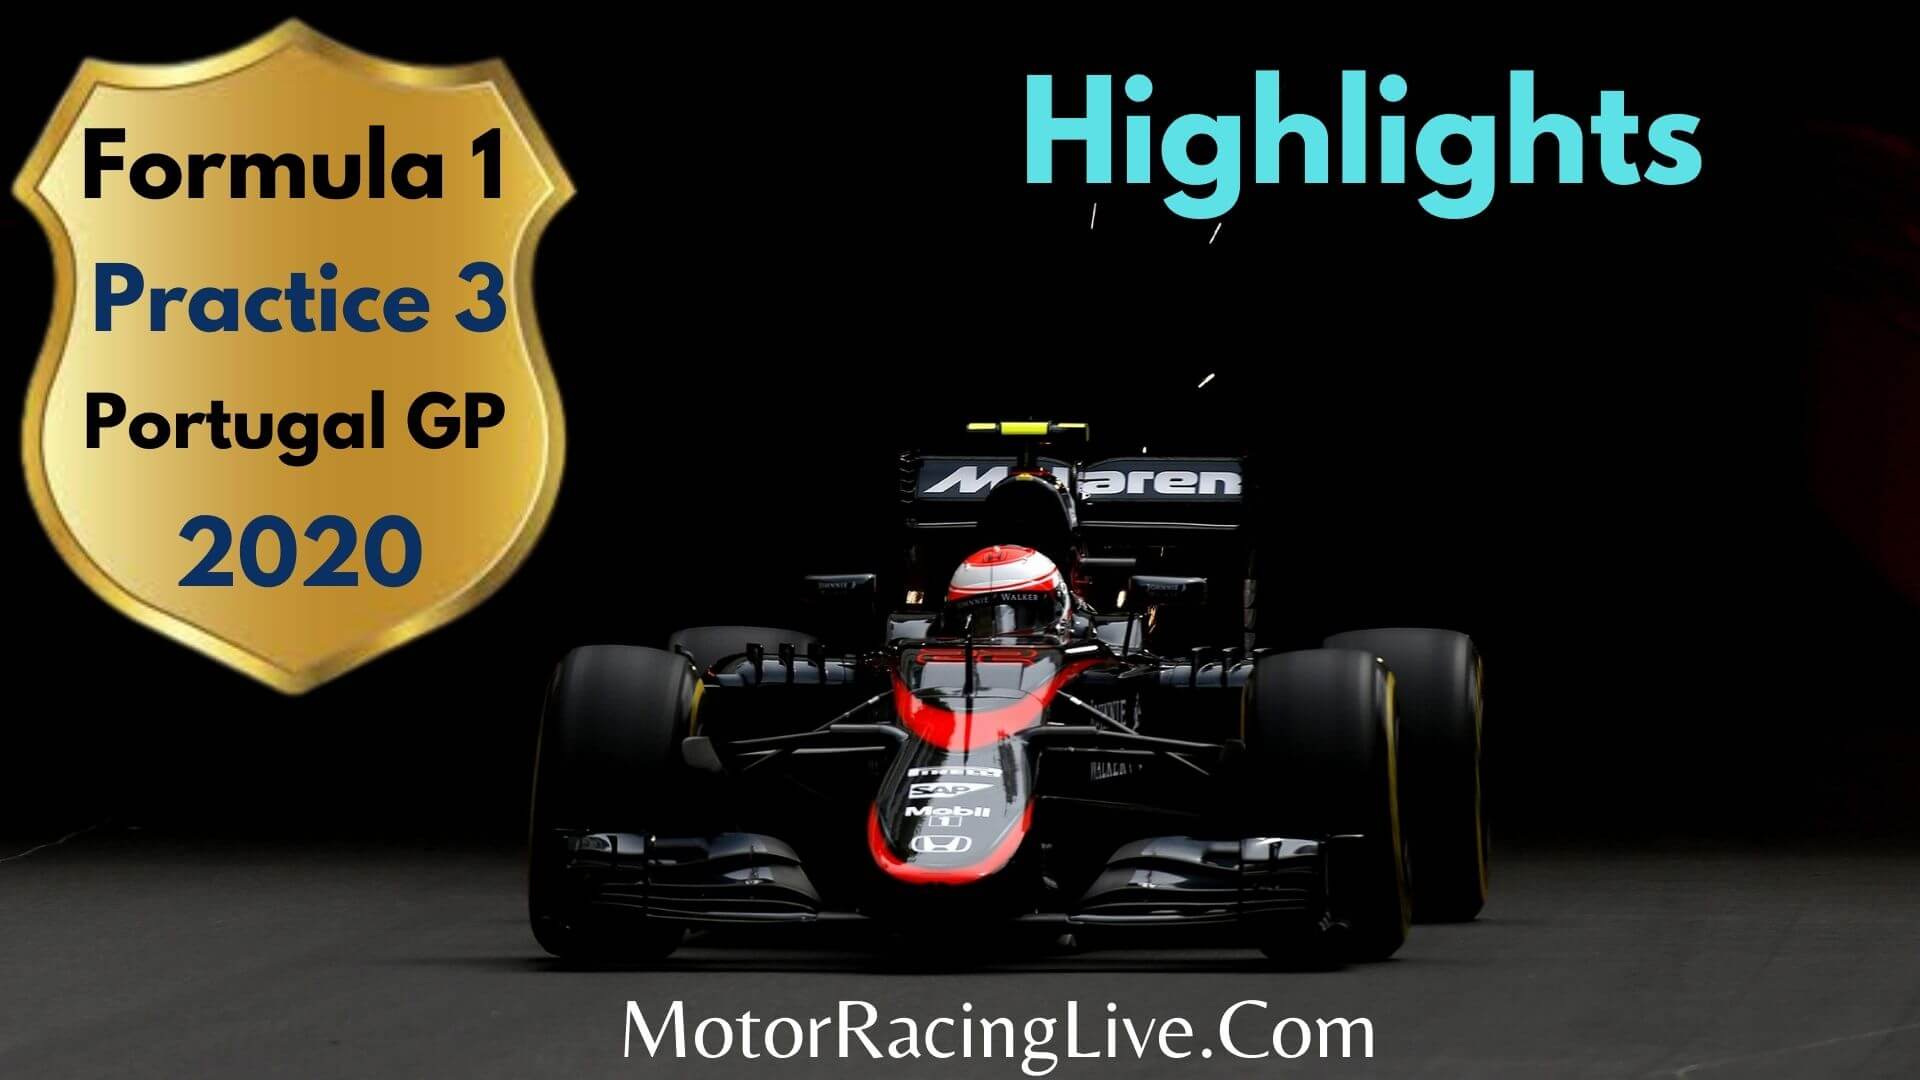 F1 Practice 3 Portugal GP Race 2020 Highlights